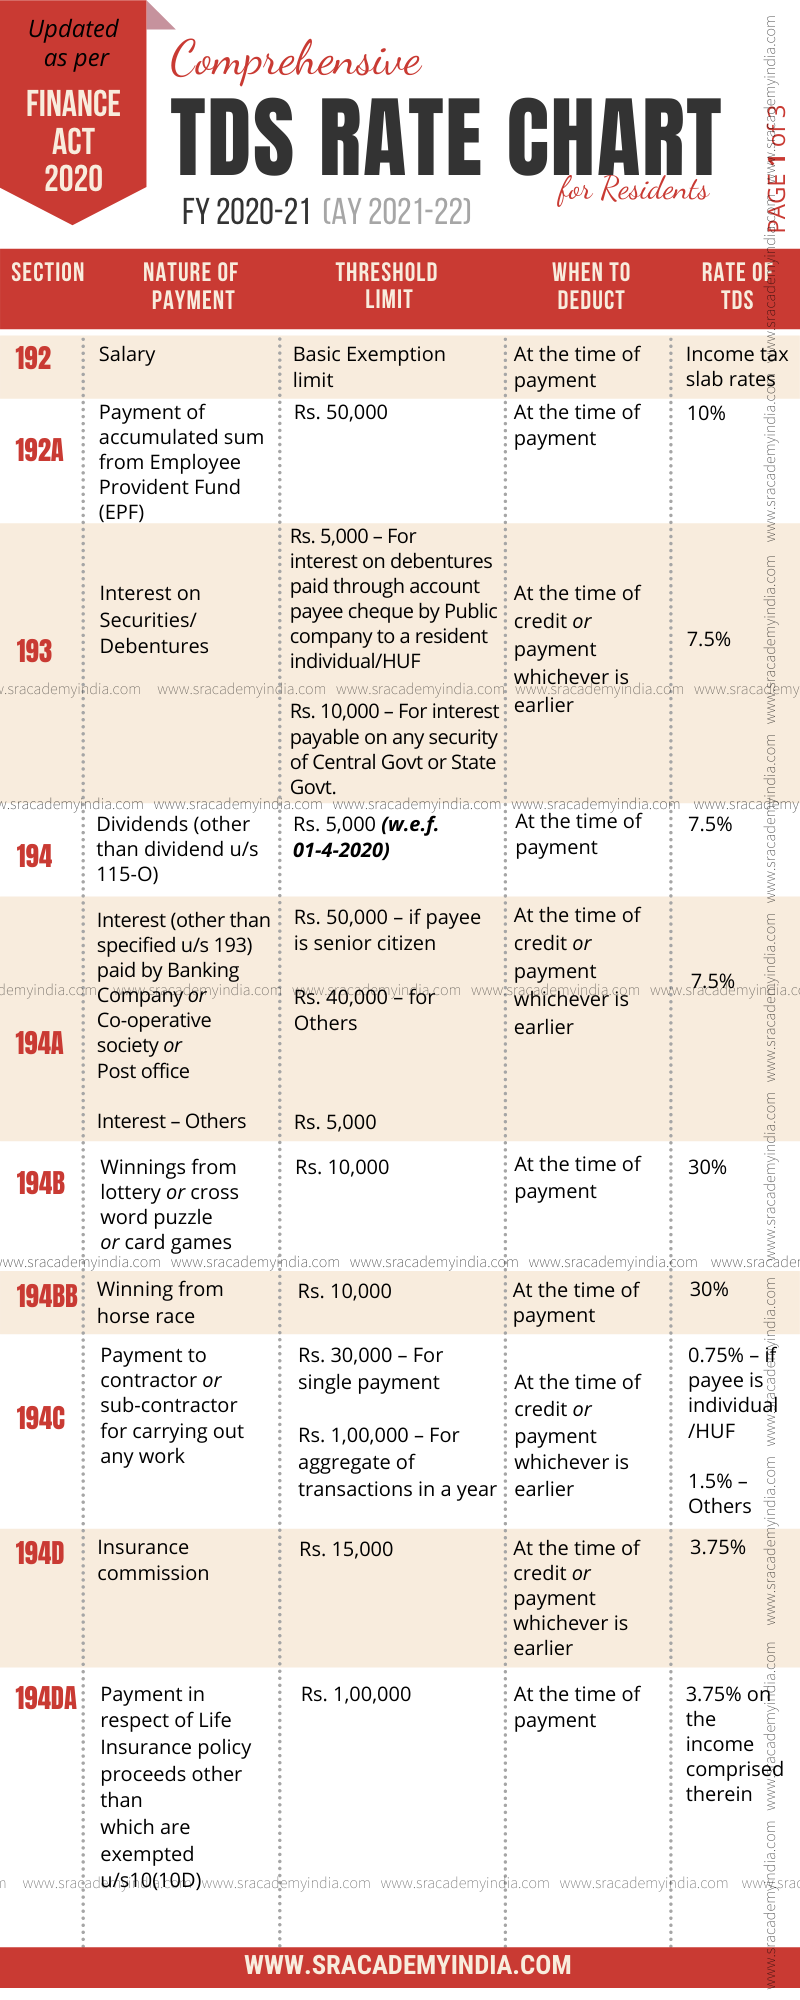 tds rate chart fy 2020-21 part1